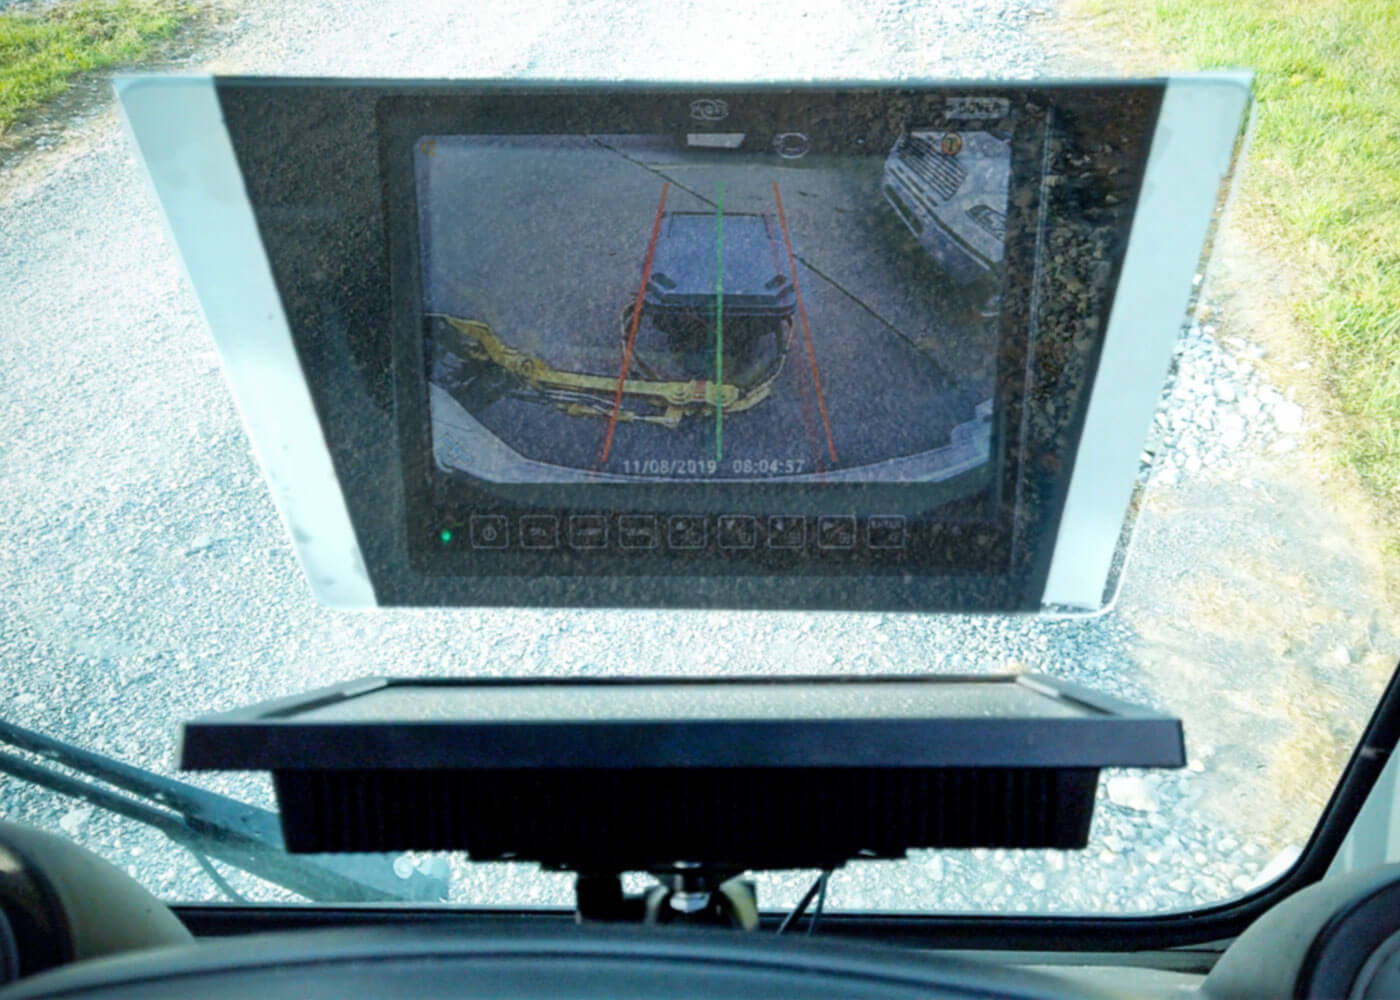 HALO HUD heads up display for Command SST sideload garbage truck